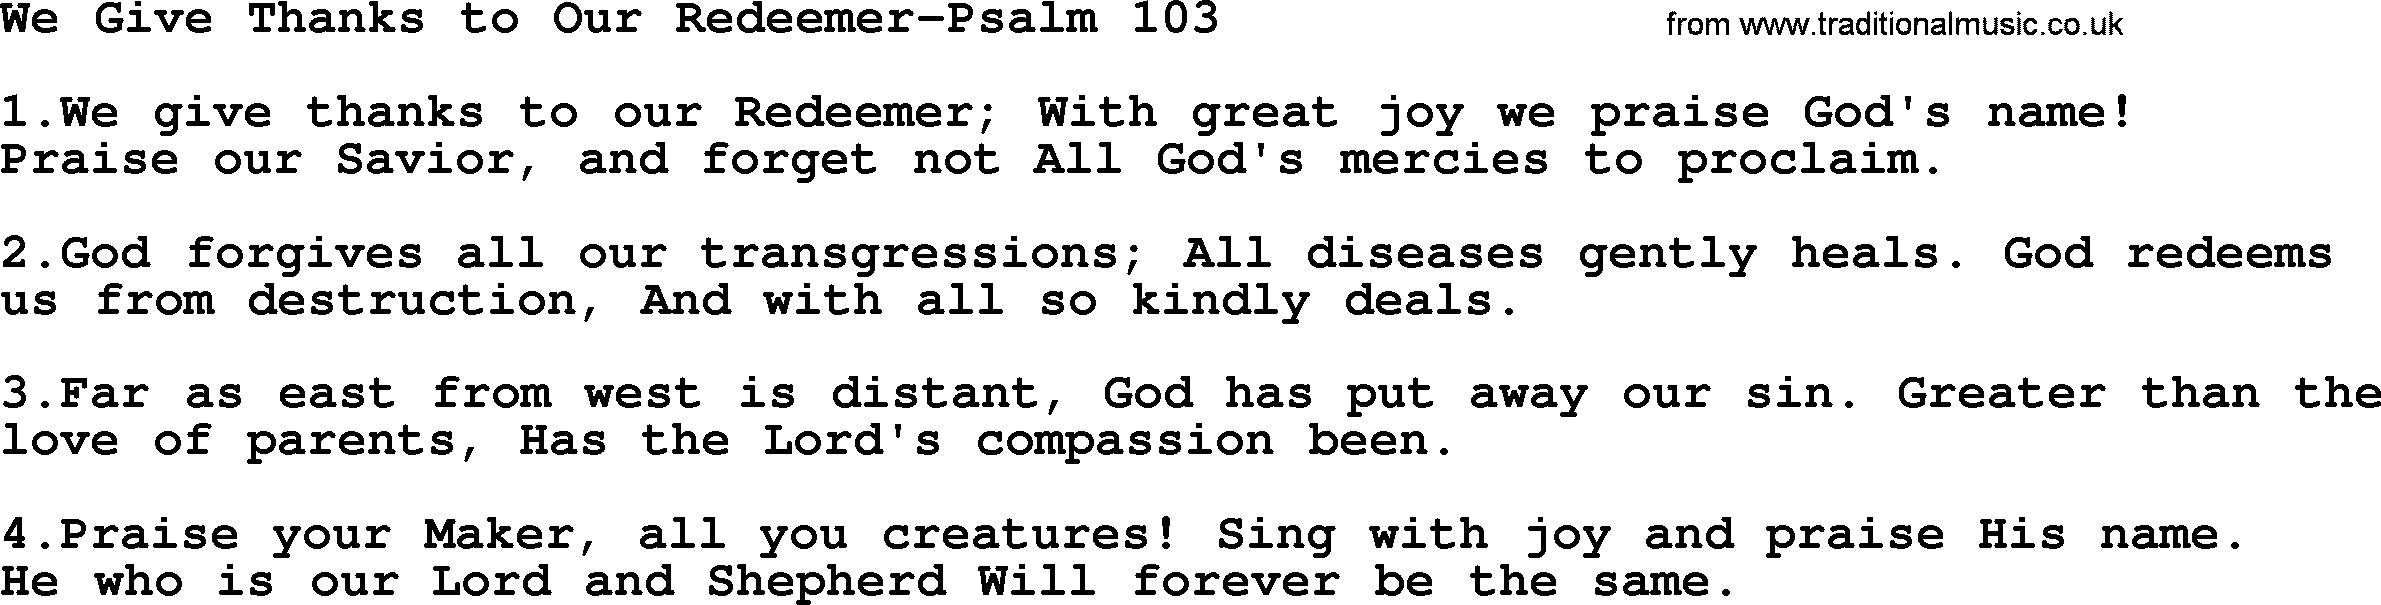 Hymns from the Psalms, Hymn: We Give Thanks To Our Redeemer-Psalm 103, lyrics with PDF